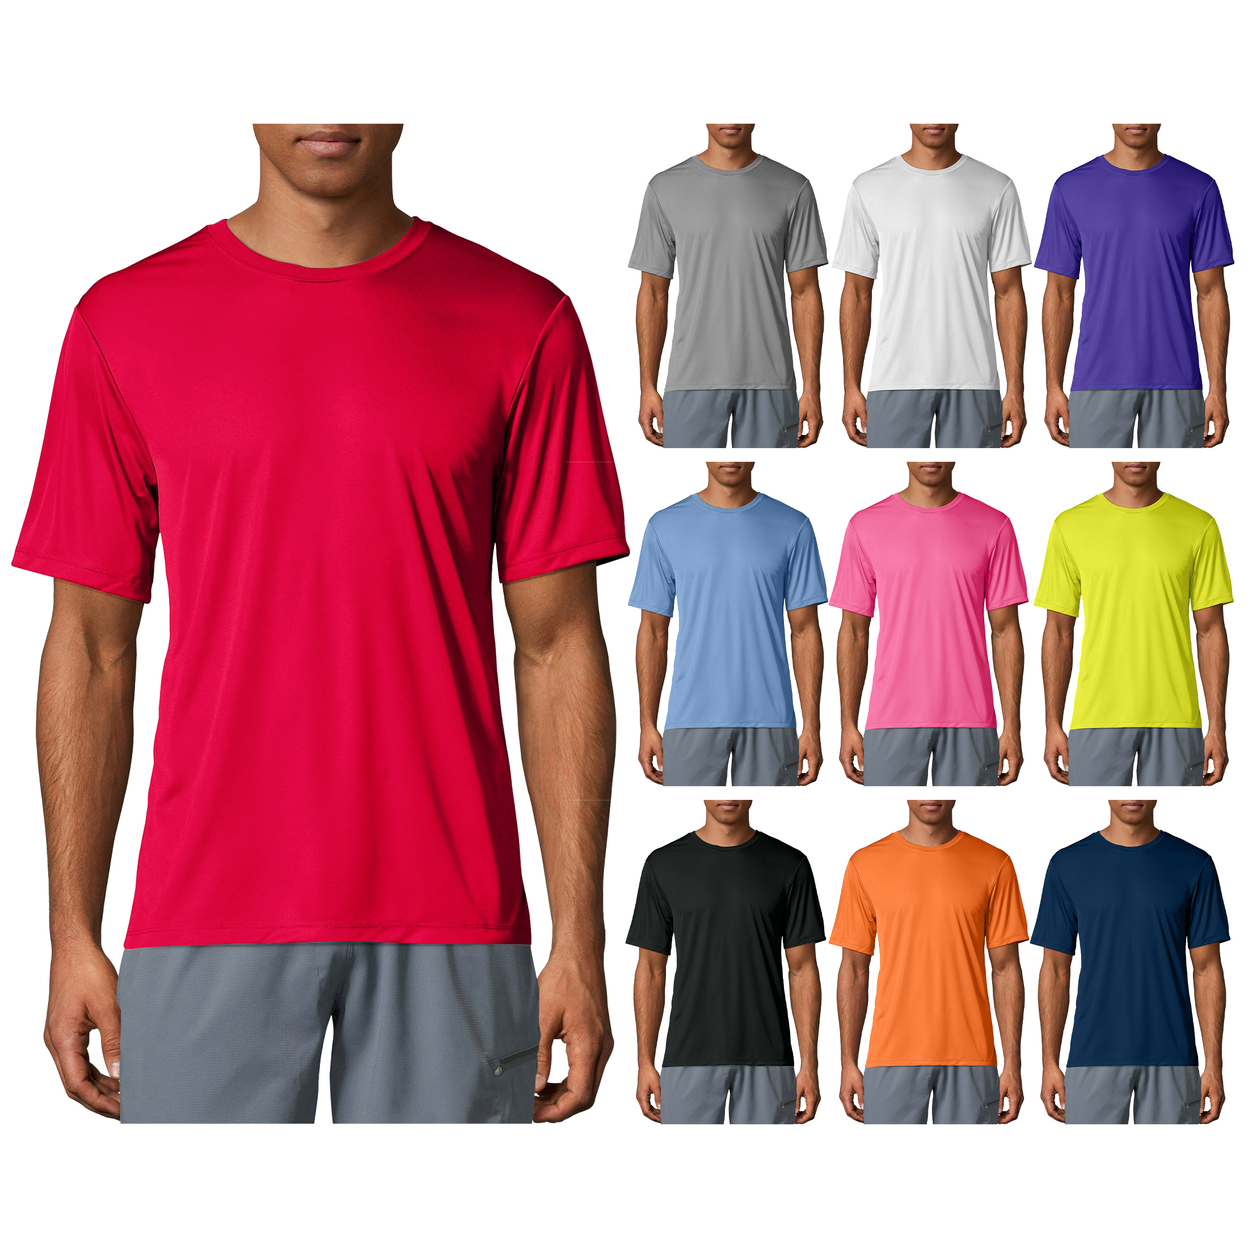 5-Pack: Men's Moisture Wicking Cool Dri-Fit Performance Short Sleeve Crew Neck T-Shirts - Small